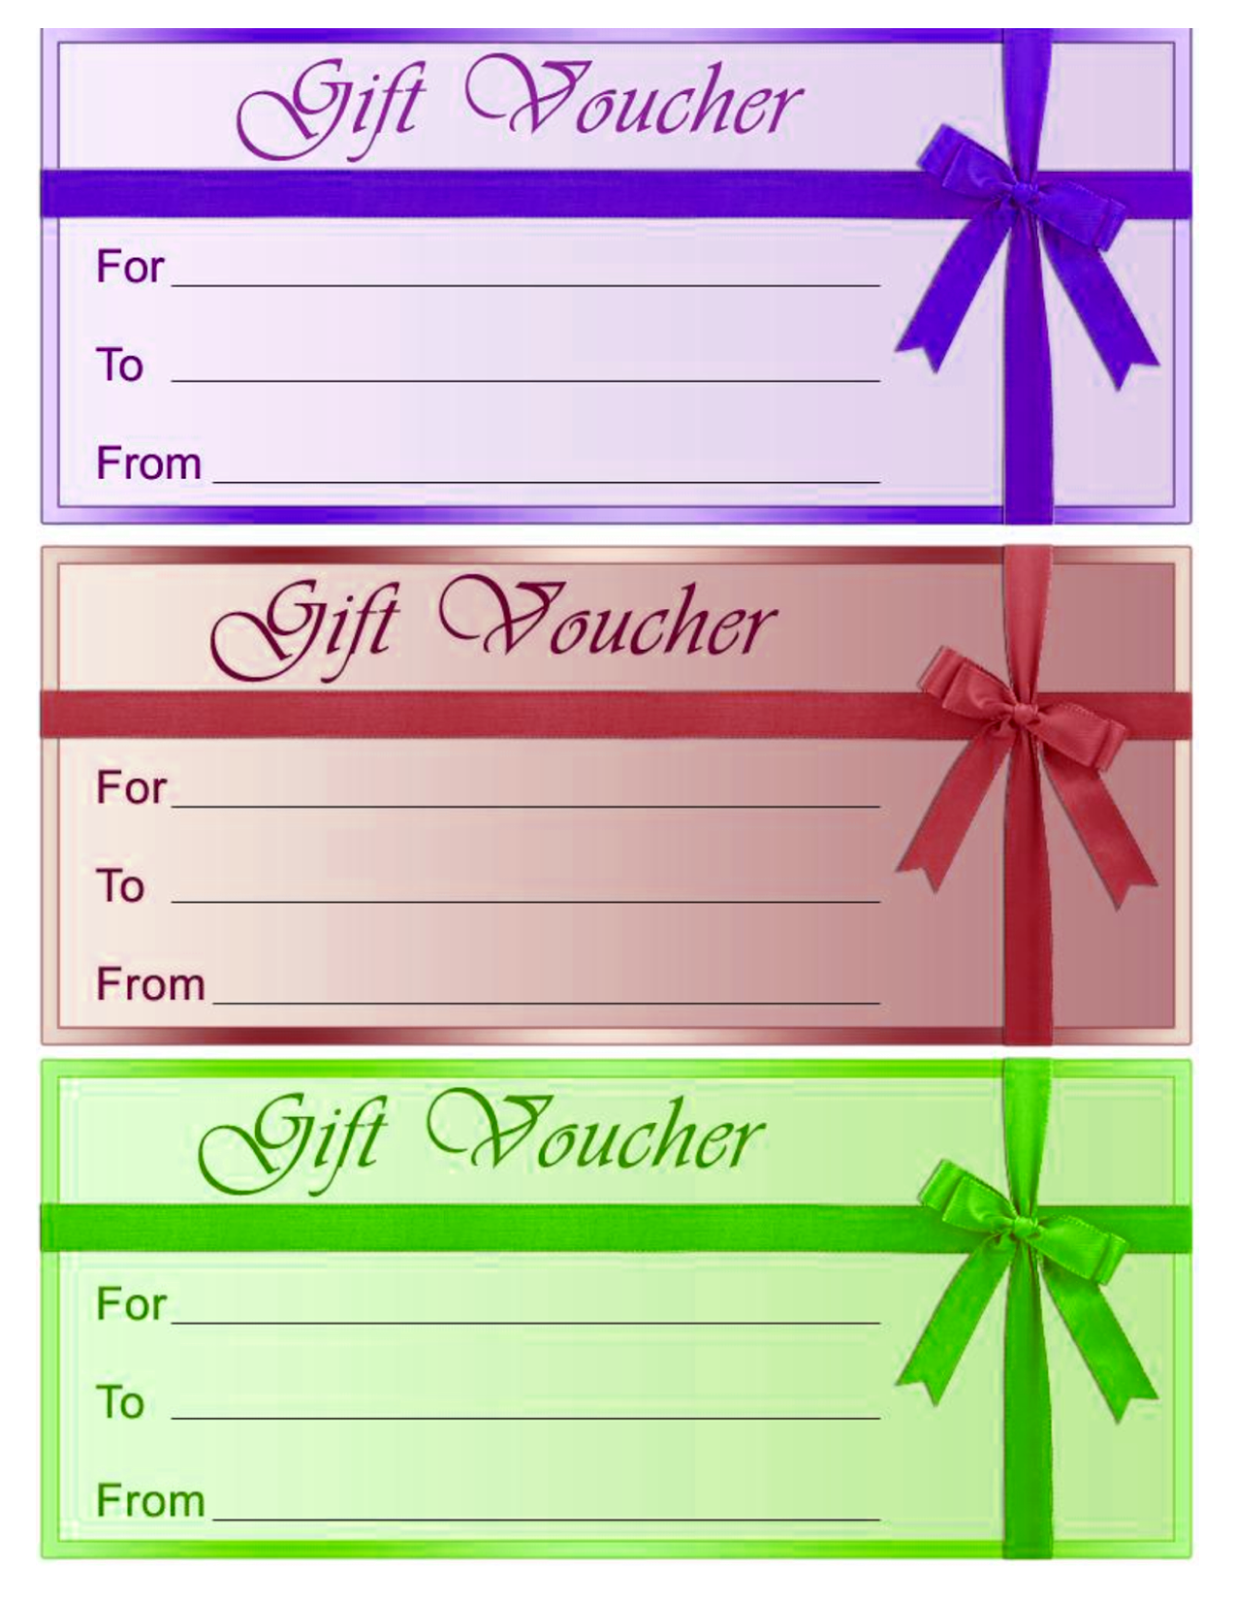 examples-of-best-certificate-gift-certificate-template-free